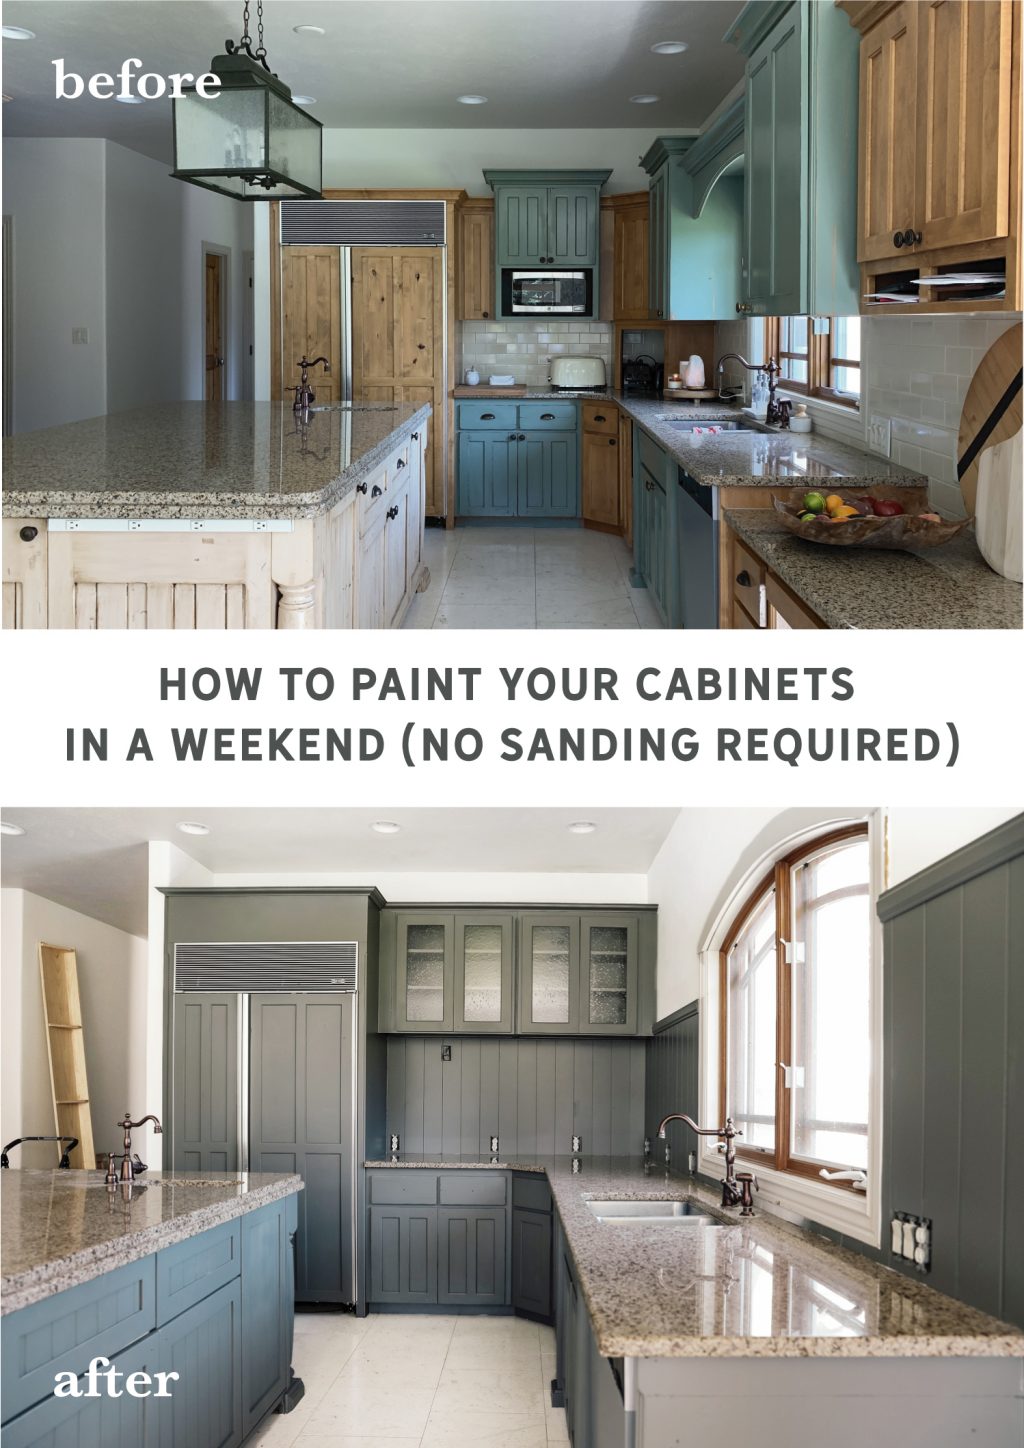 How To Paint Your Cabinets In A Weekend, Clean Kitchen Cupboards Before Painting